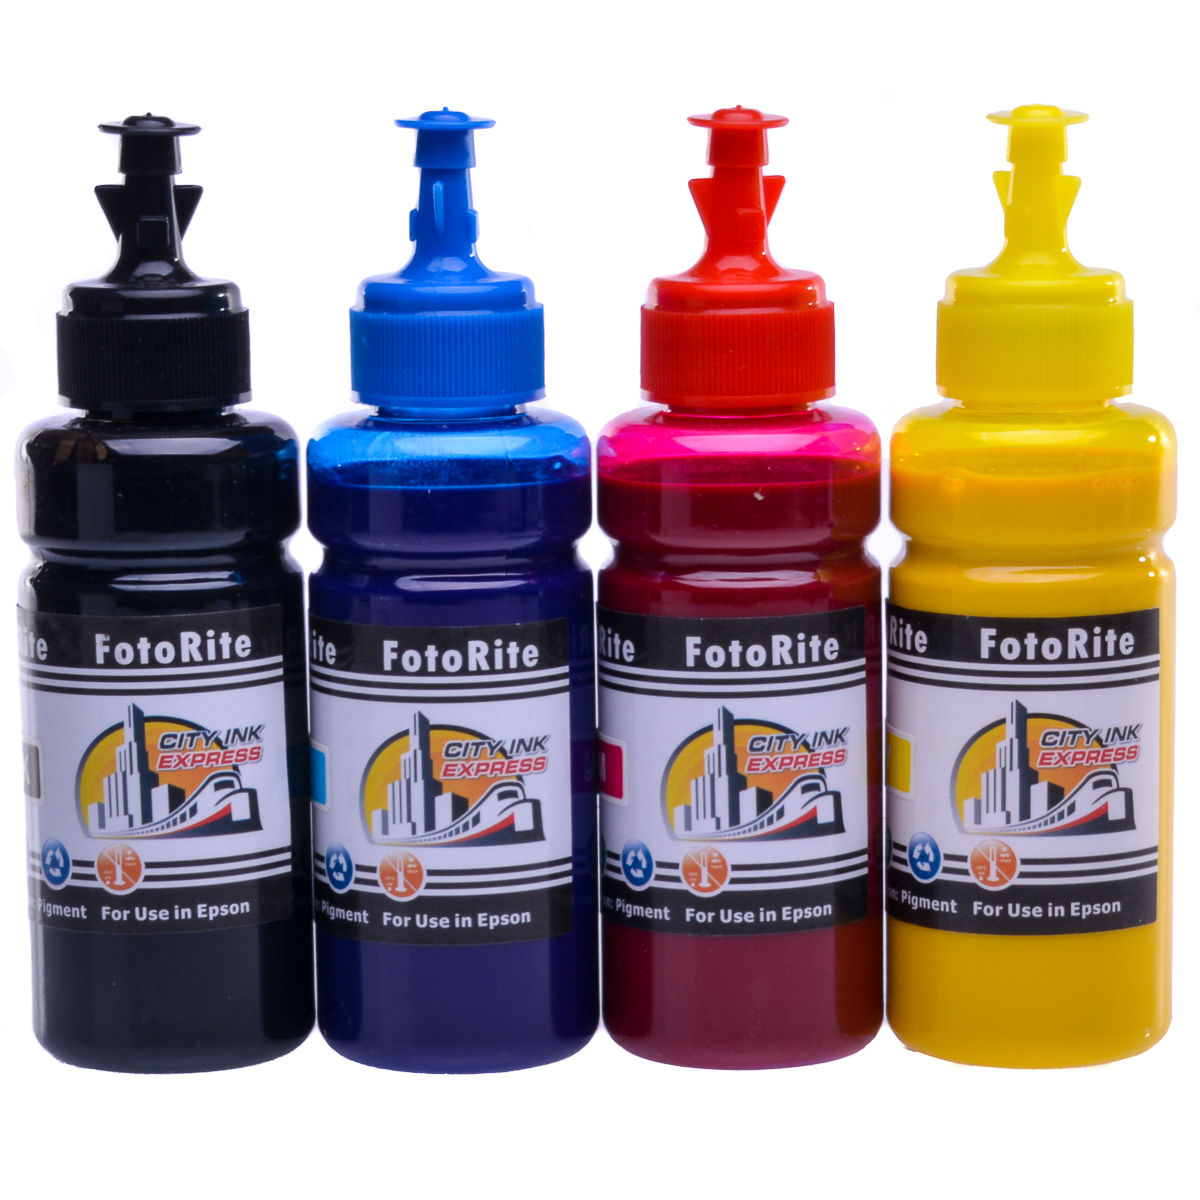 Cheap Multipack pigment ink refill replaces Epson ET-16600